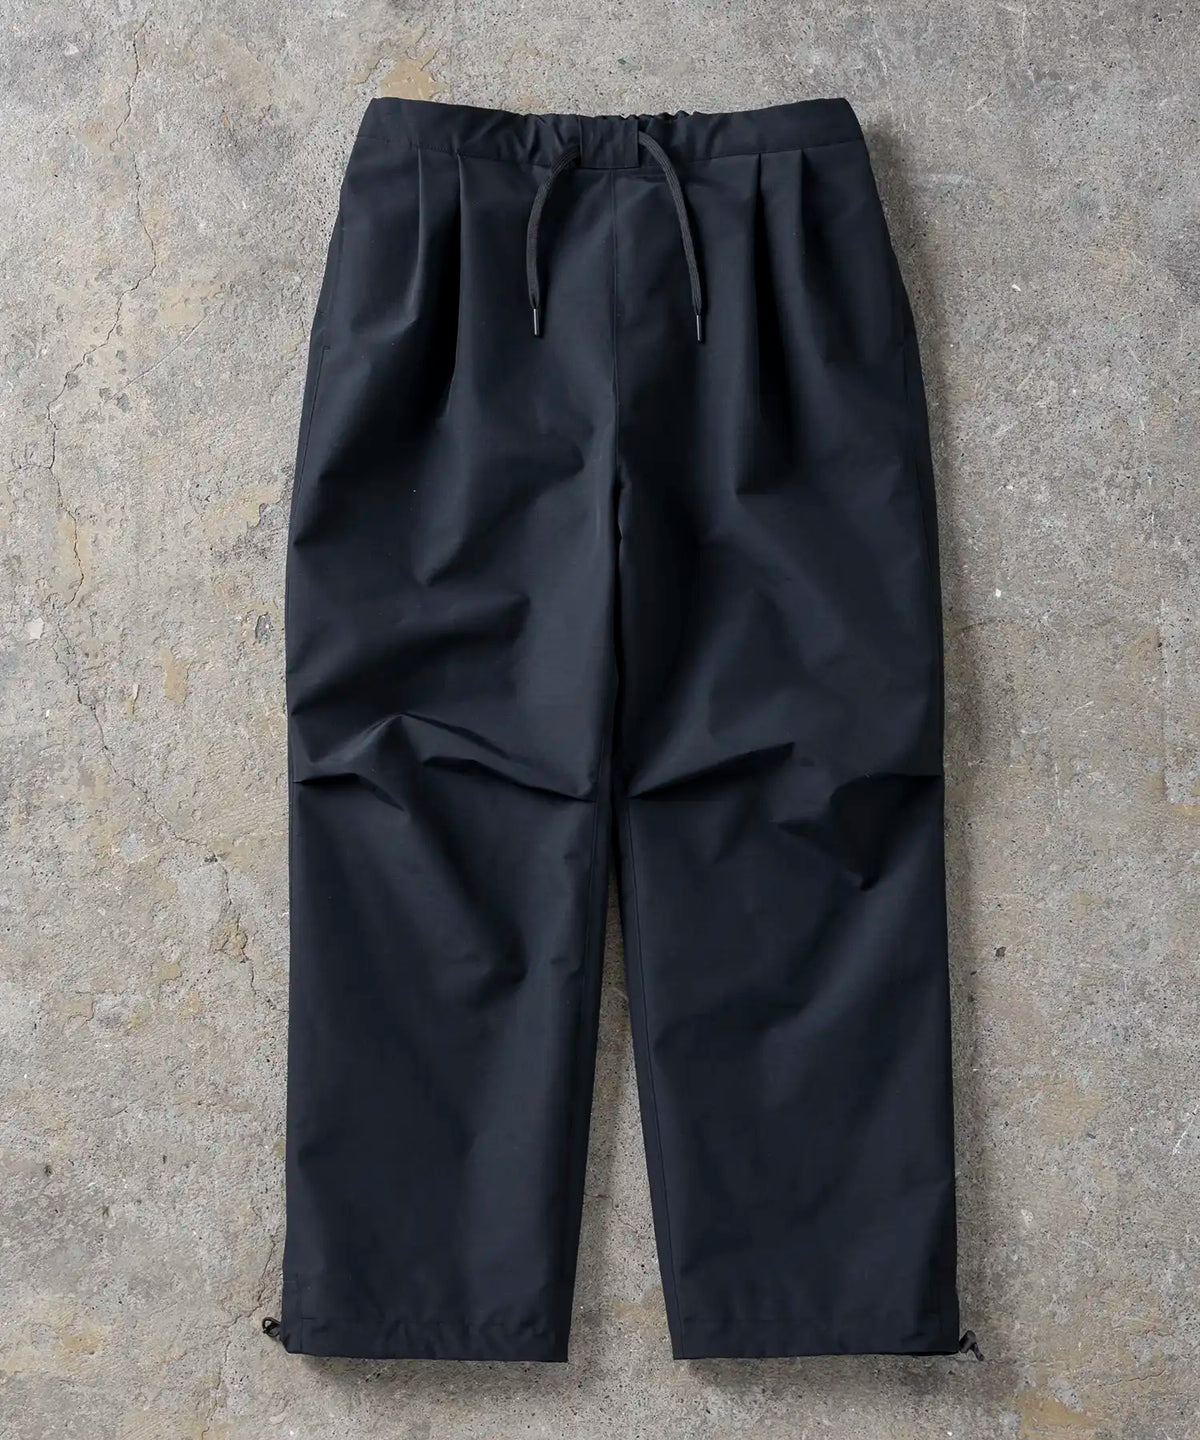 【MENS】GORE WEATHER PROOF OVER PANTS / WINDSTOPPER(R) プロダクト BY GORE‑TEX LABS 2023年10月下旬お届け